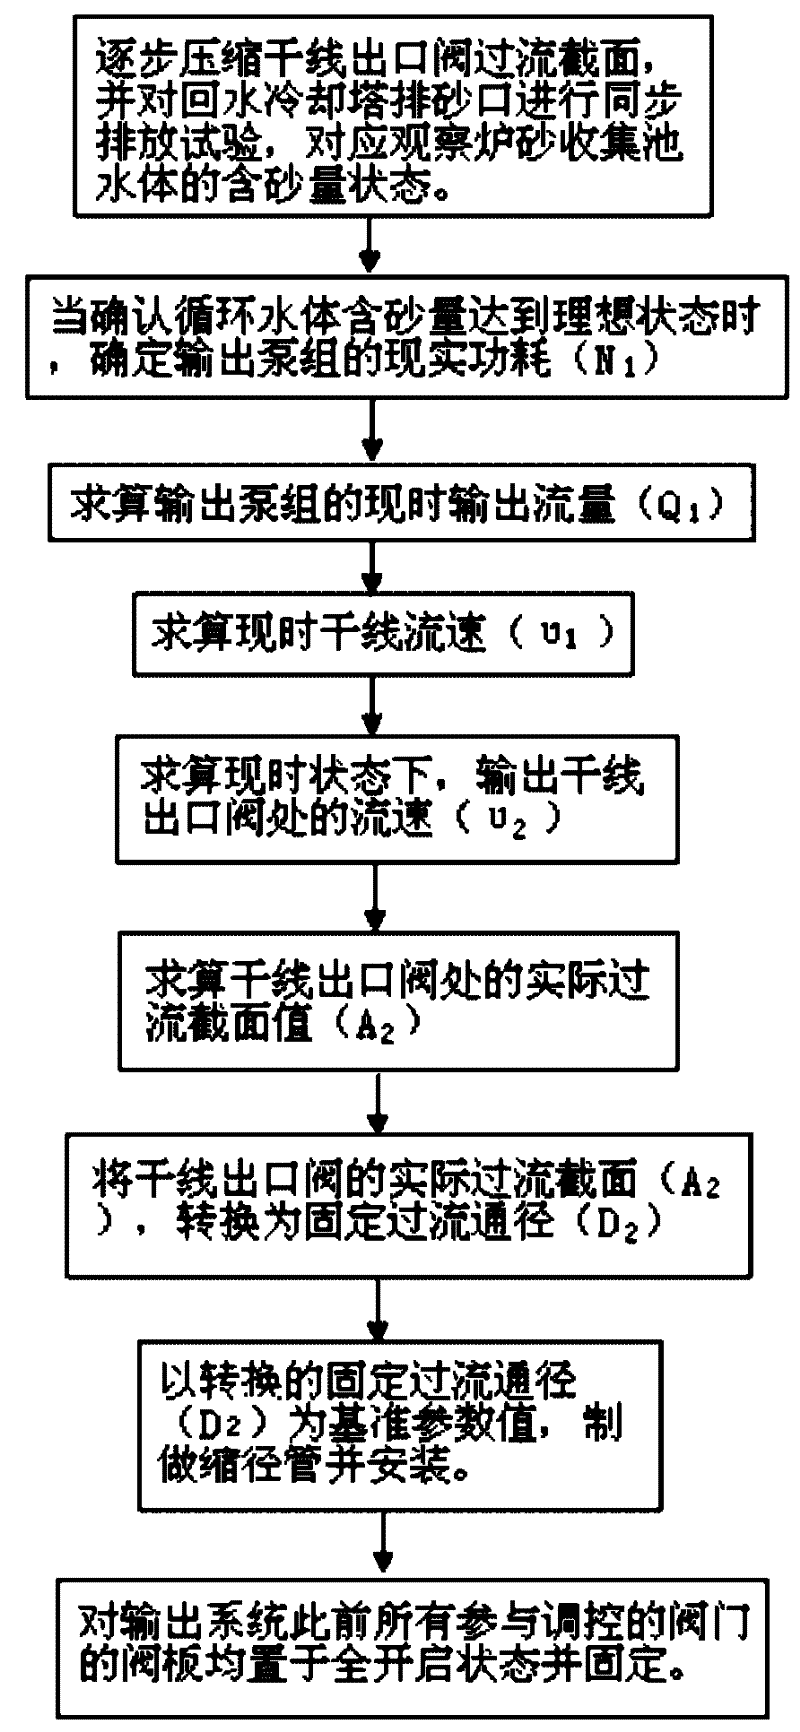 Method for controlling sand content of water body of blast furnace INBA circulating system and flow-limiting device thereof